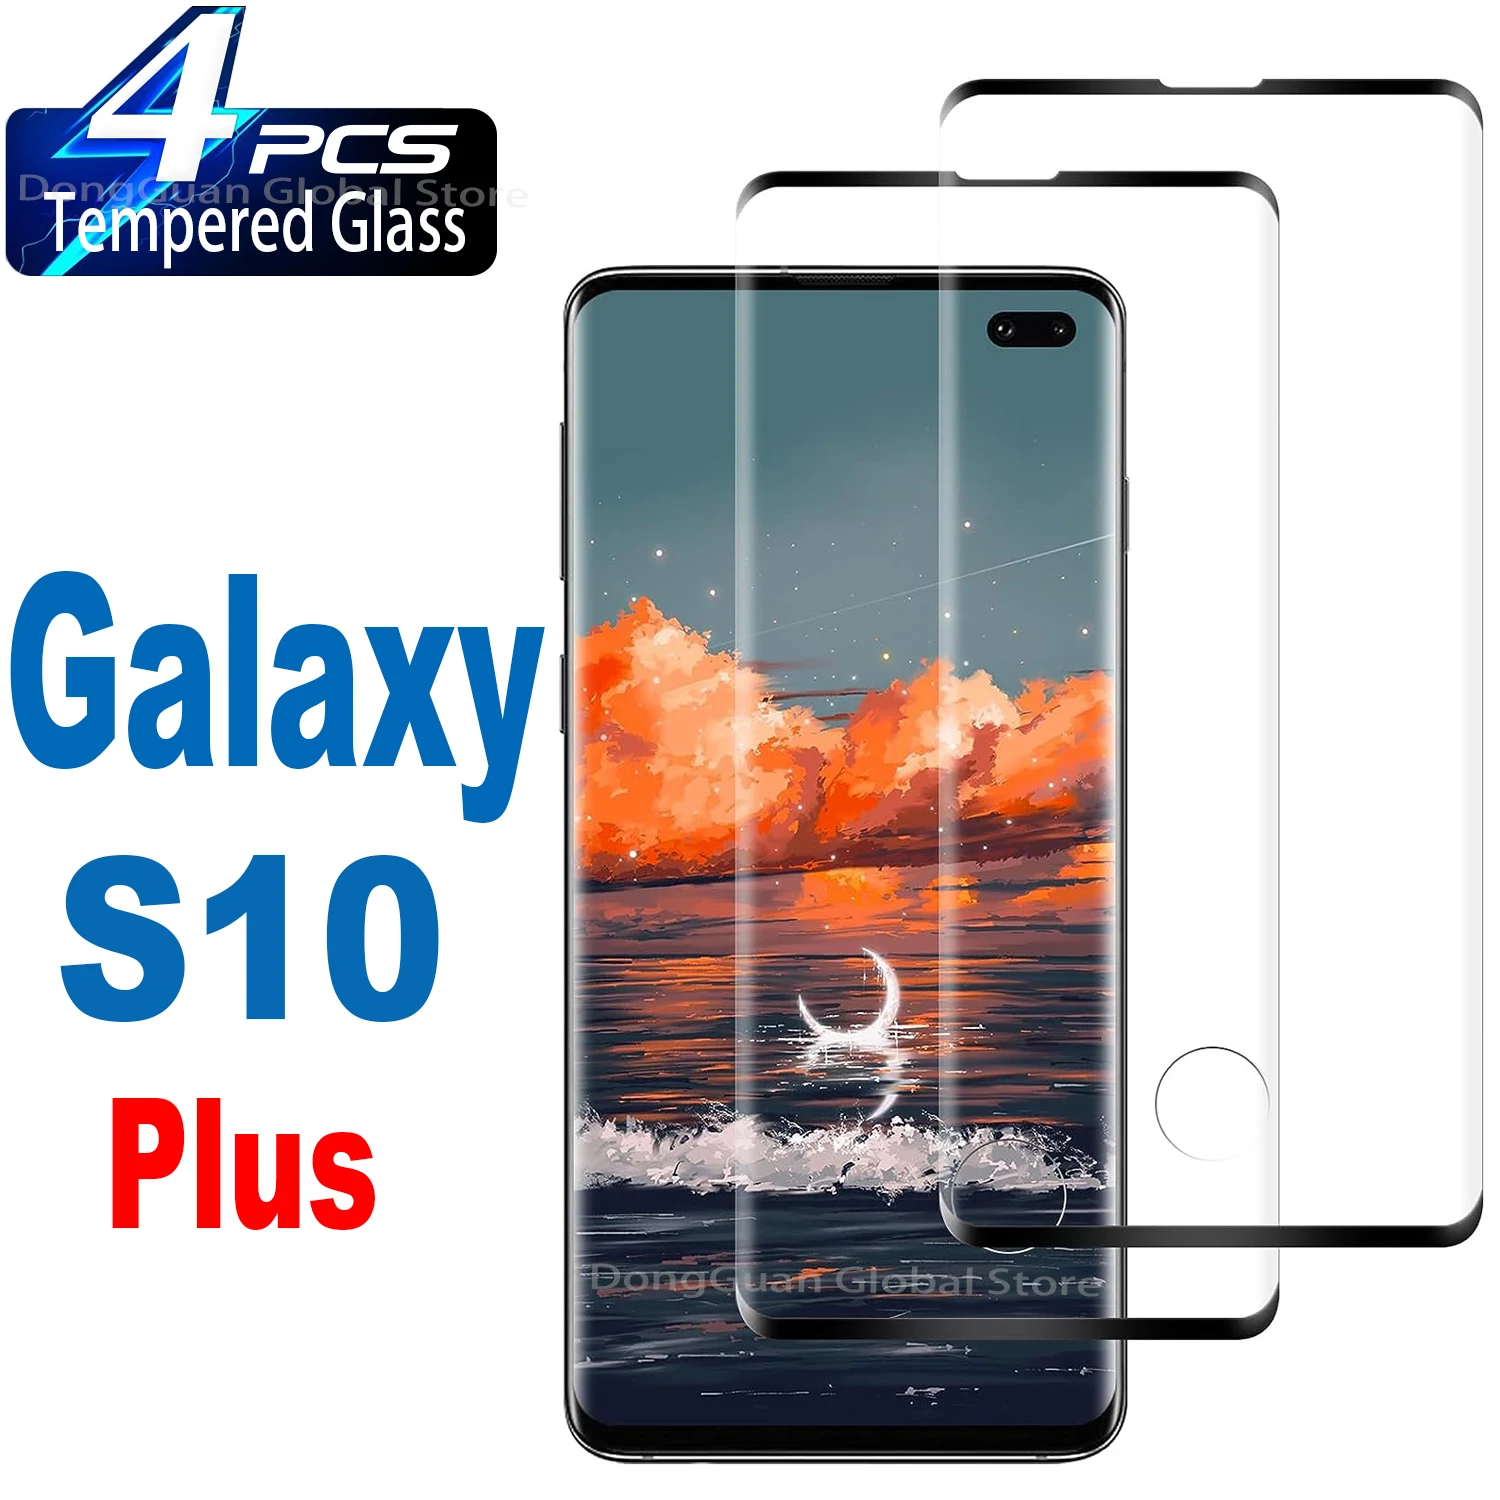 2/4Pcs Tempered Glass For Samsung Galaxy S10 Plus S10+ S20 S20+ Plus Screen Protector Glass 999d tempered glass for samsung galaxy s21 note 20 s20 ultra s10 s9 s8 plus screen protector s 21 10 9 plus hd protective glass